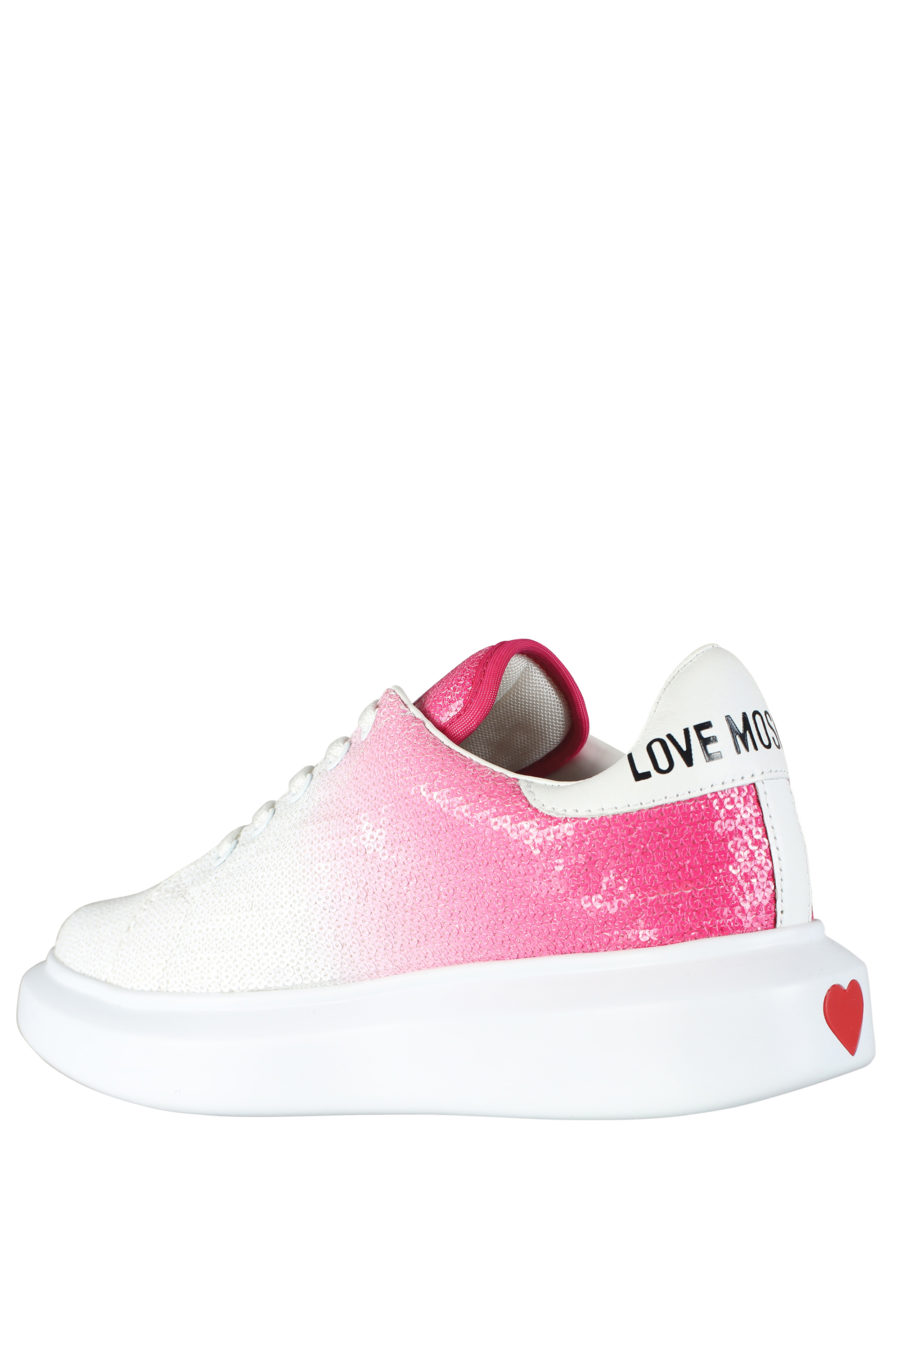 White trainers with pink gradient and sequins - IMG 5263